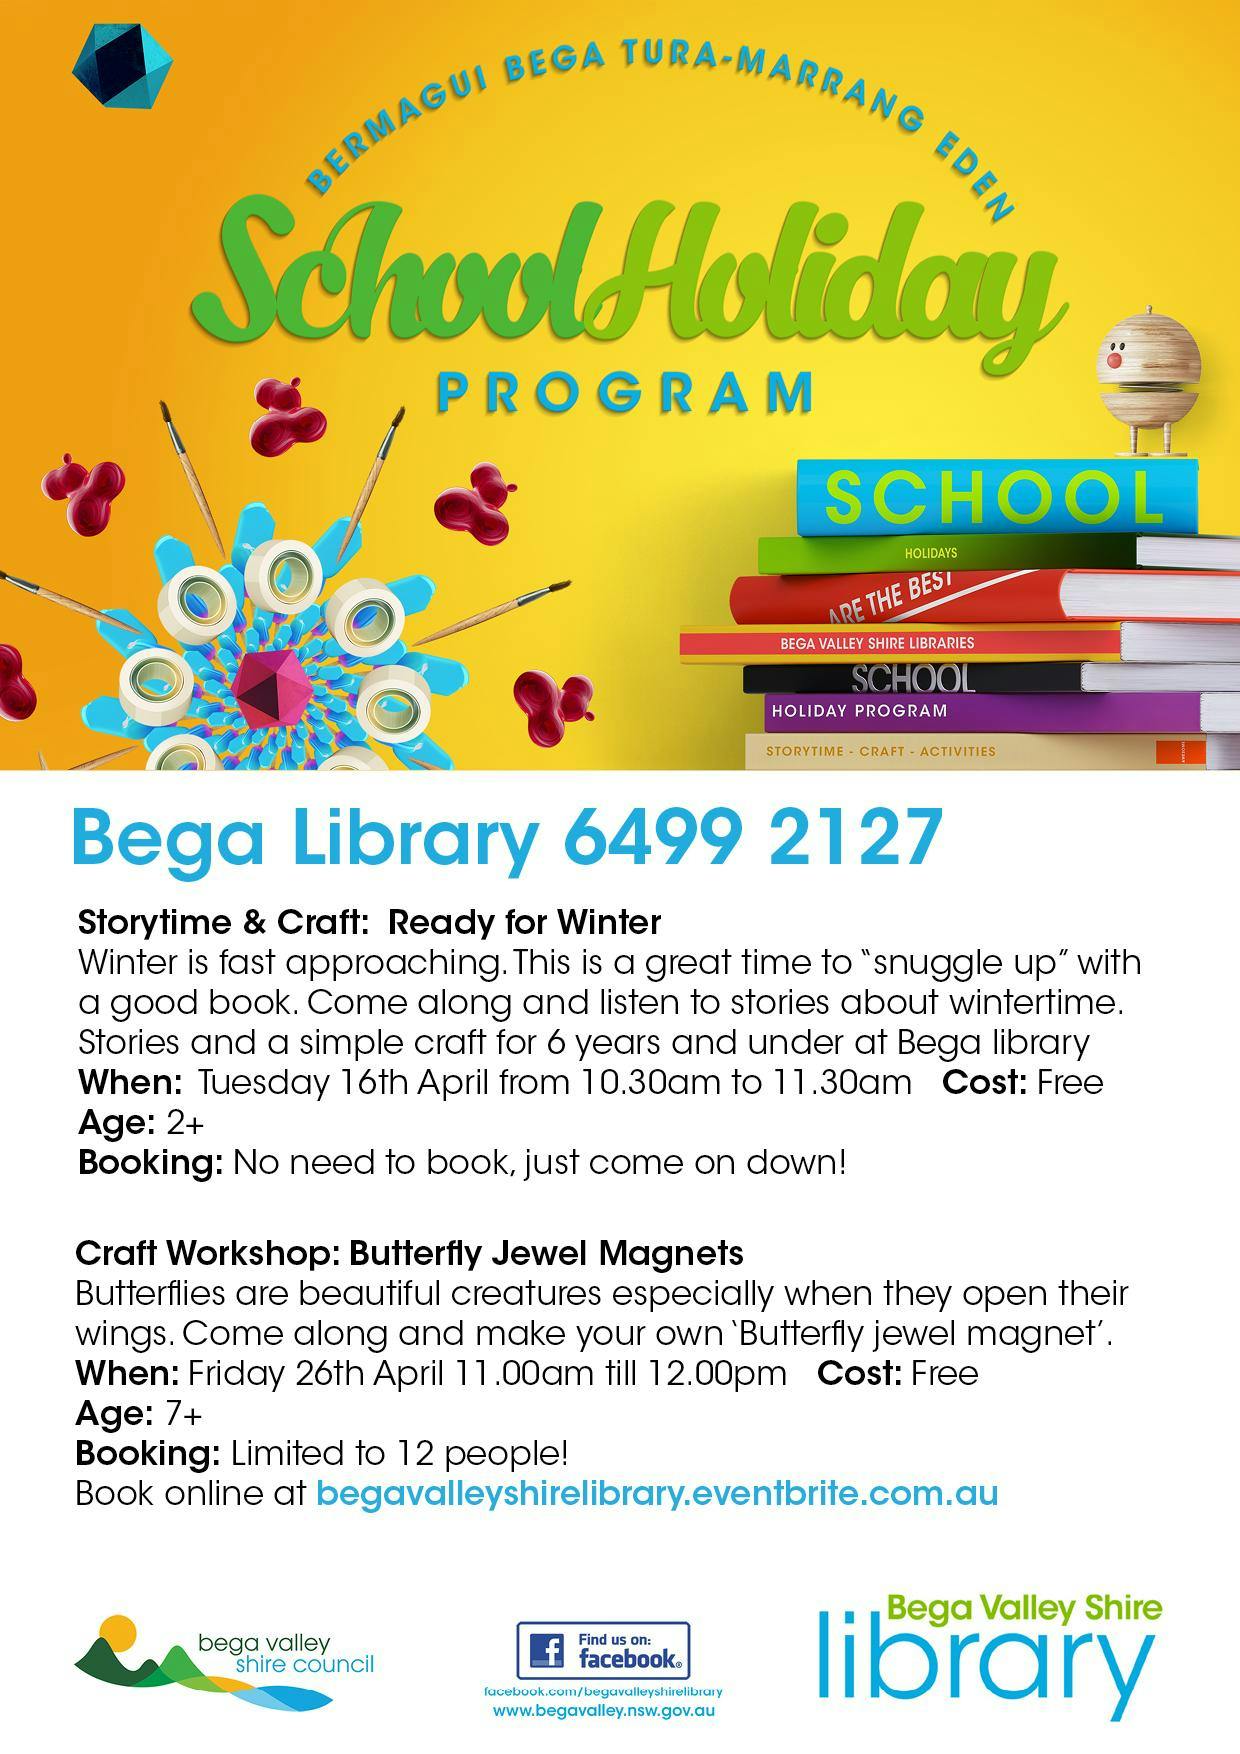 Butterfly Jewel Magnets Craft @ Bega Library